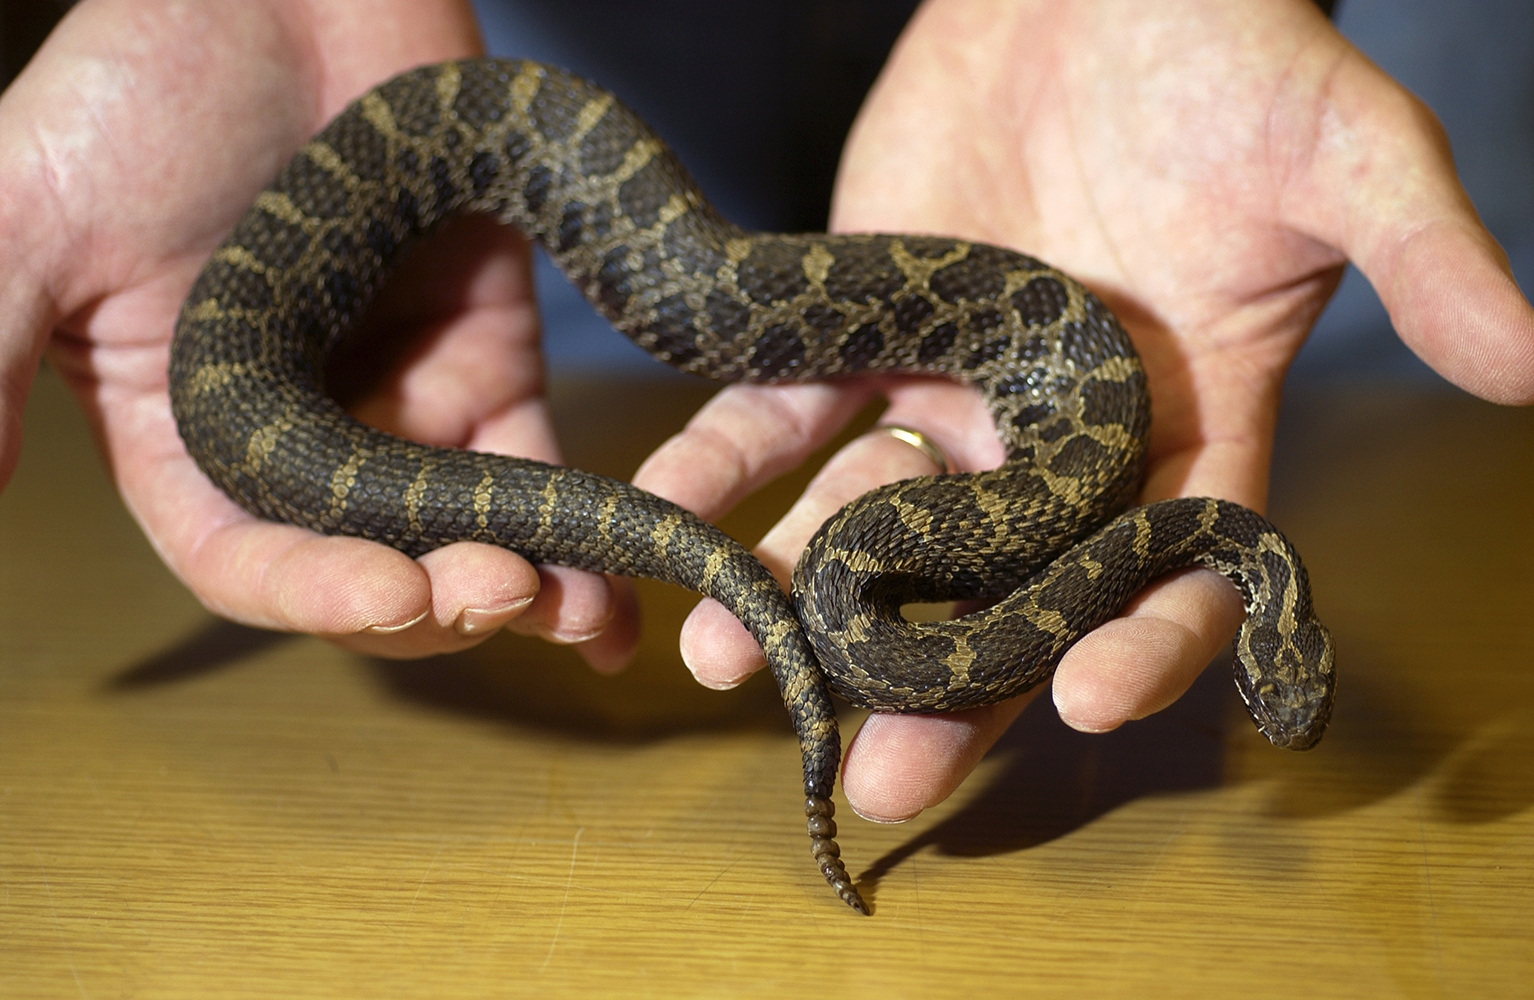 A massasauga rattlesnake held in the hands of a researcher.